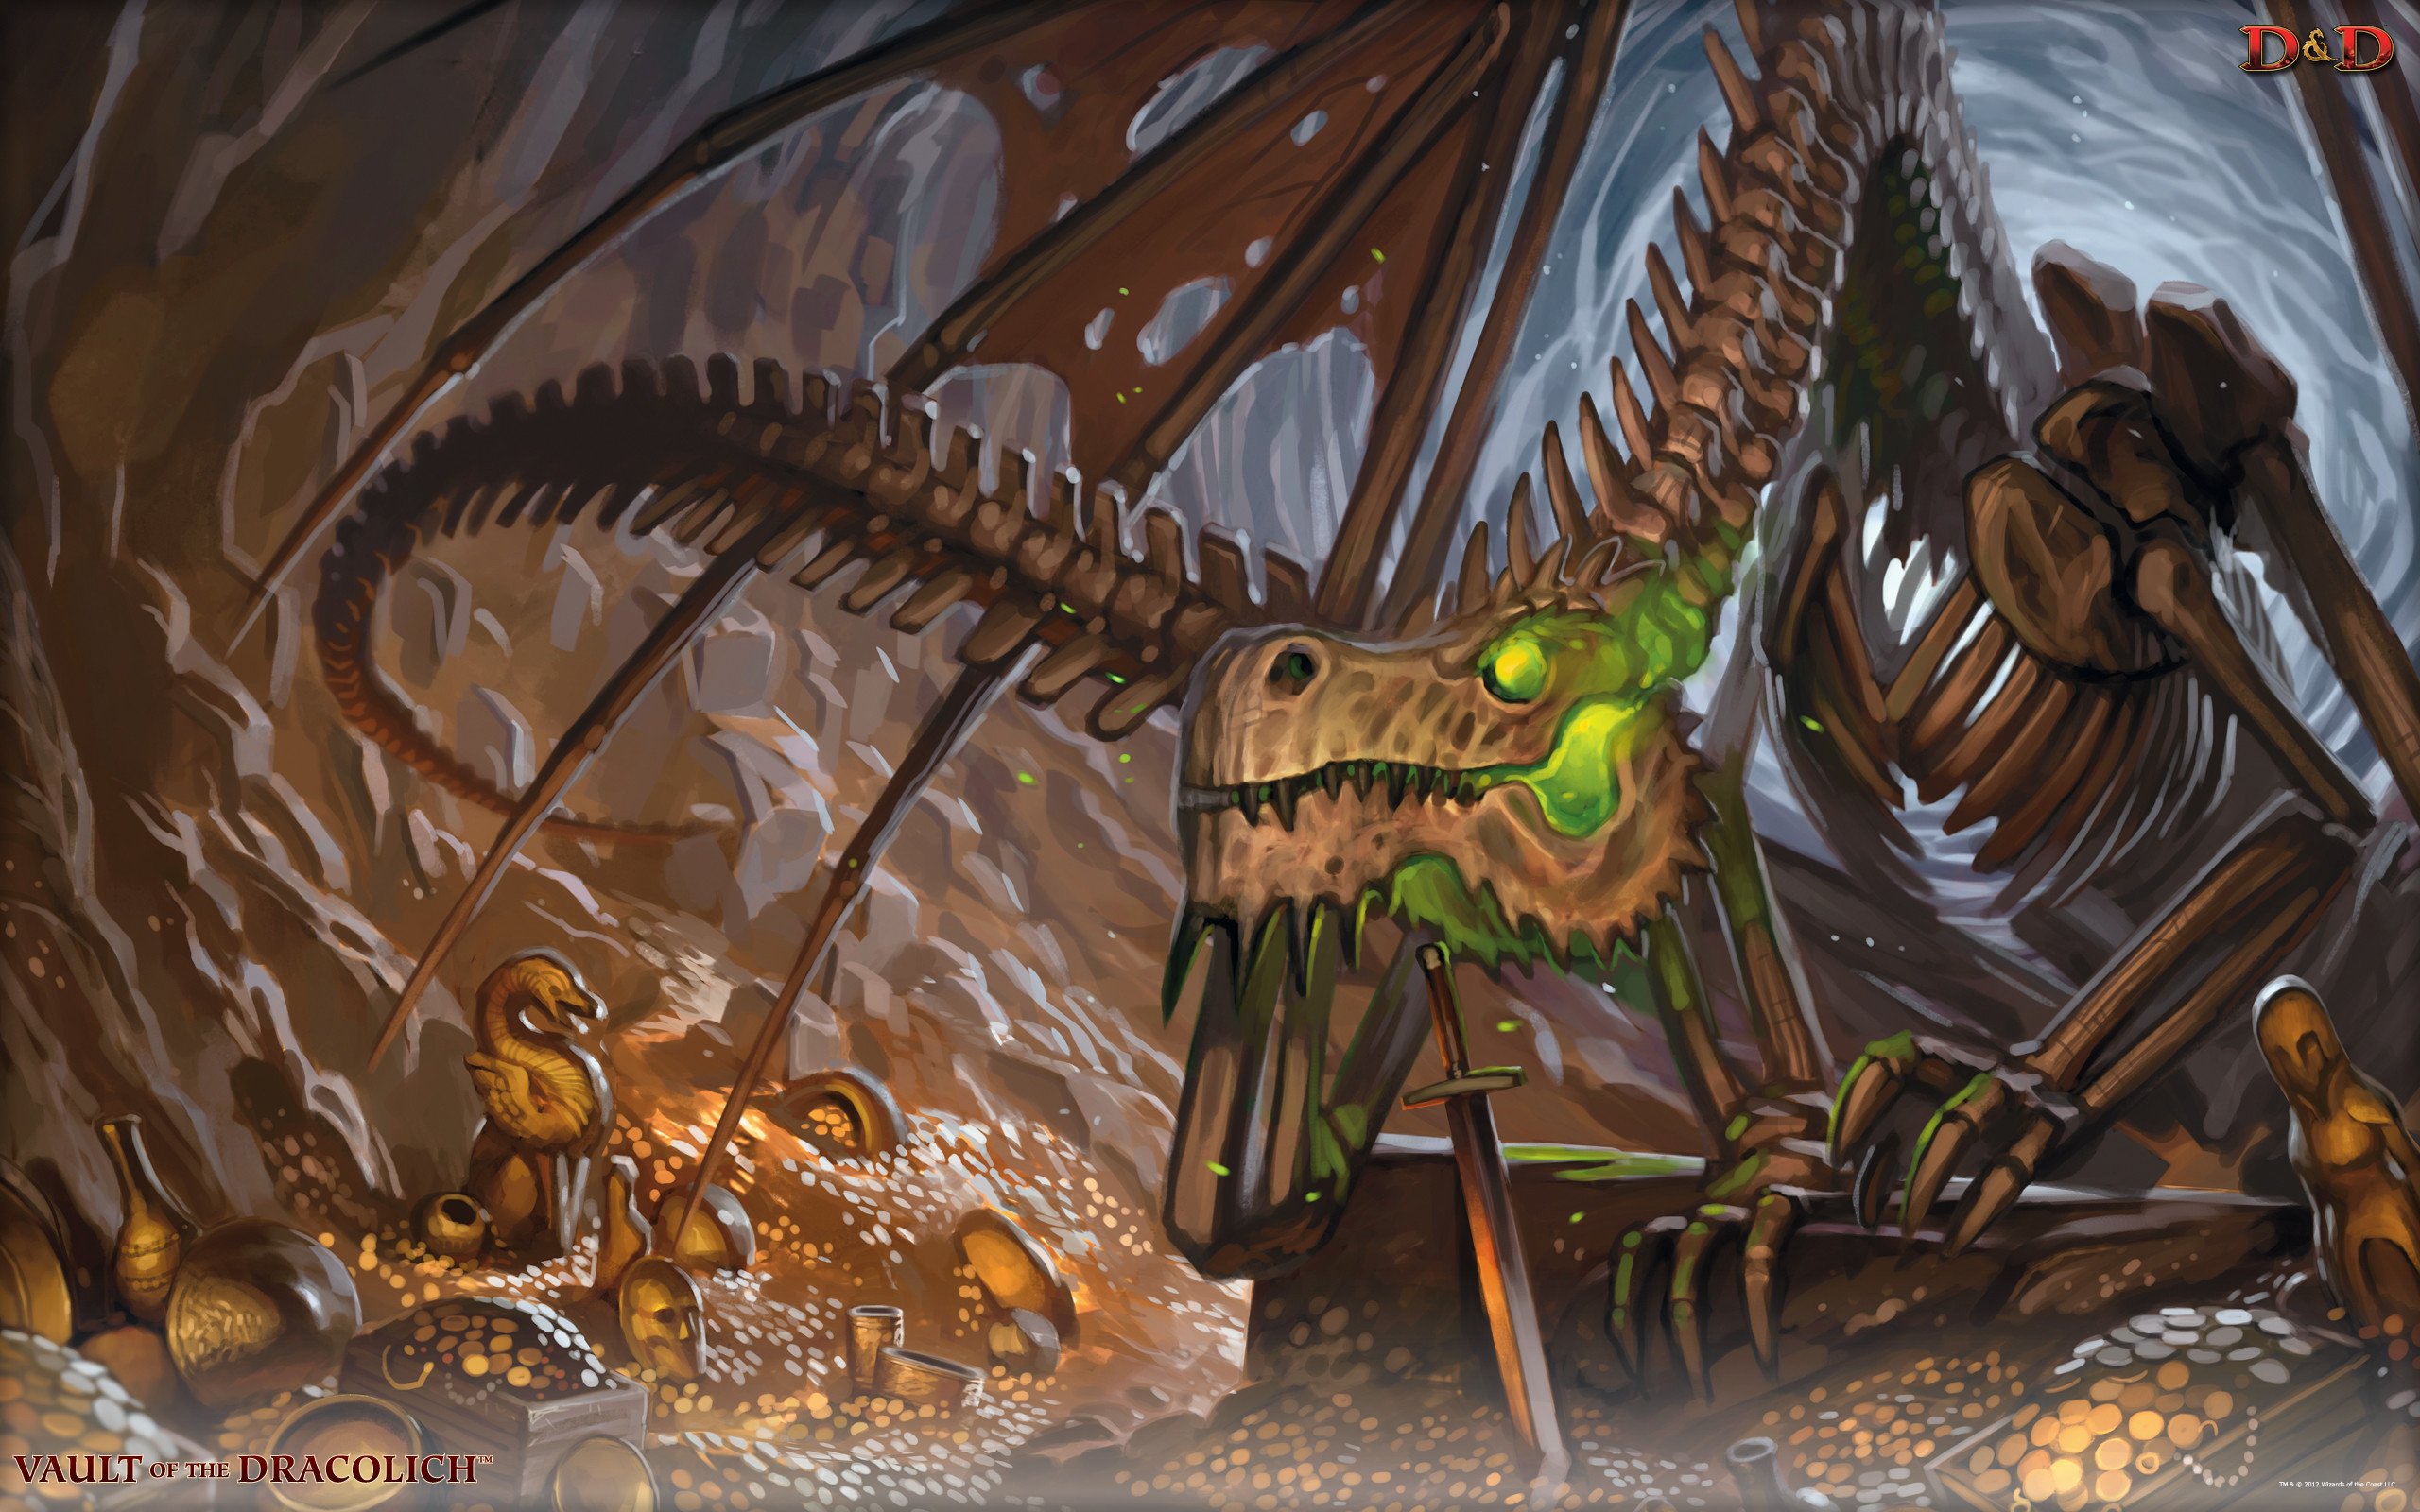 2560x1600 Vault Of The Dracolich - Dungeons & Dragons wallpaper - 1062455 ... src